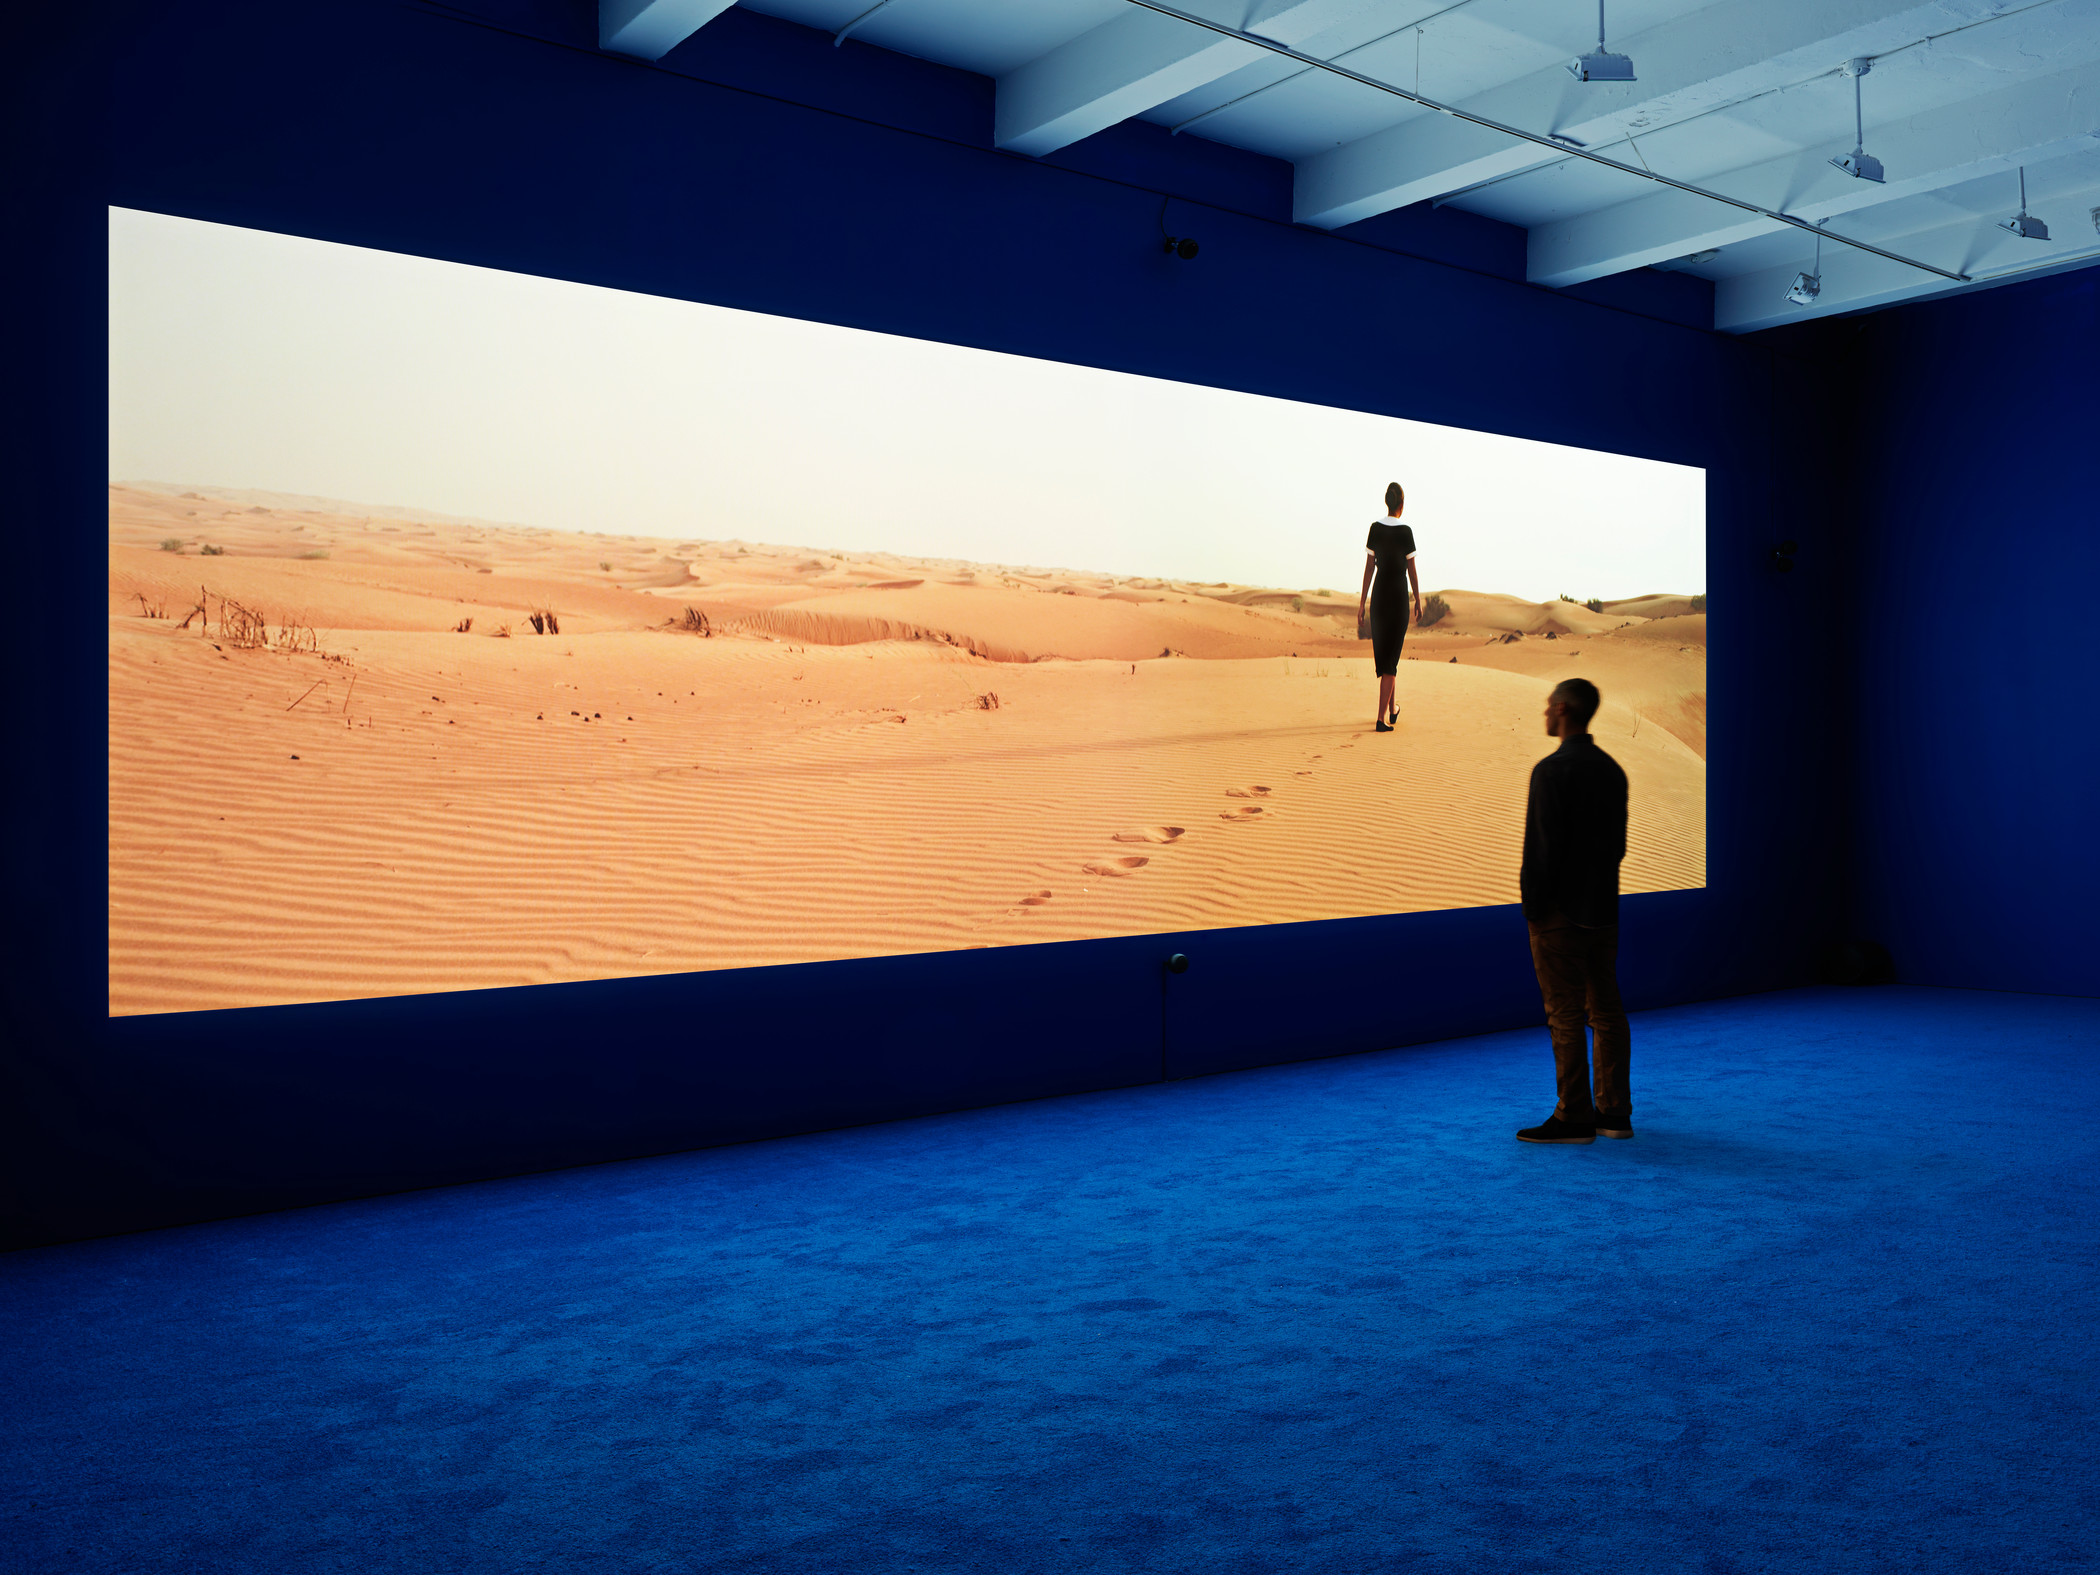  Isaac Julien, PLAYTIME, 2013, Los Angeles County Museum of Art, gift of Sheridan Brown, installation view, Metro Pictures, New York, 2013, © Isaac Julien, photo courtesy the artist and Metro Pictures, New York, photograph: Genevieve Hanson